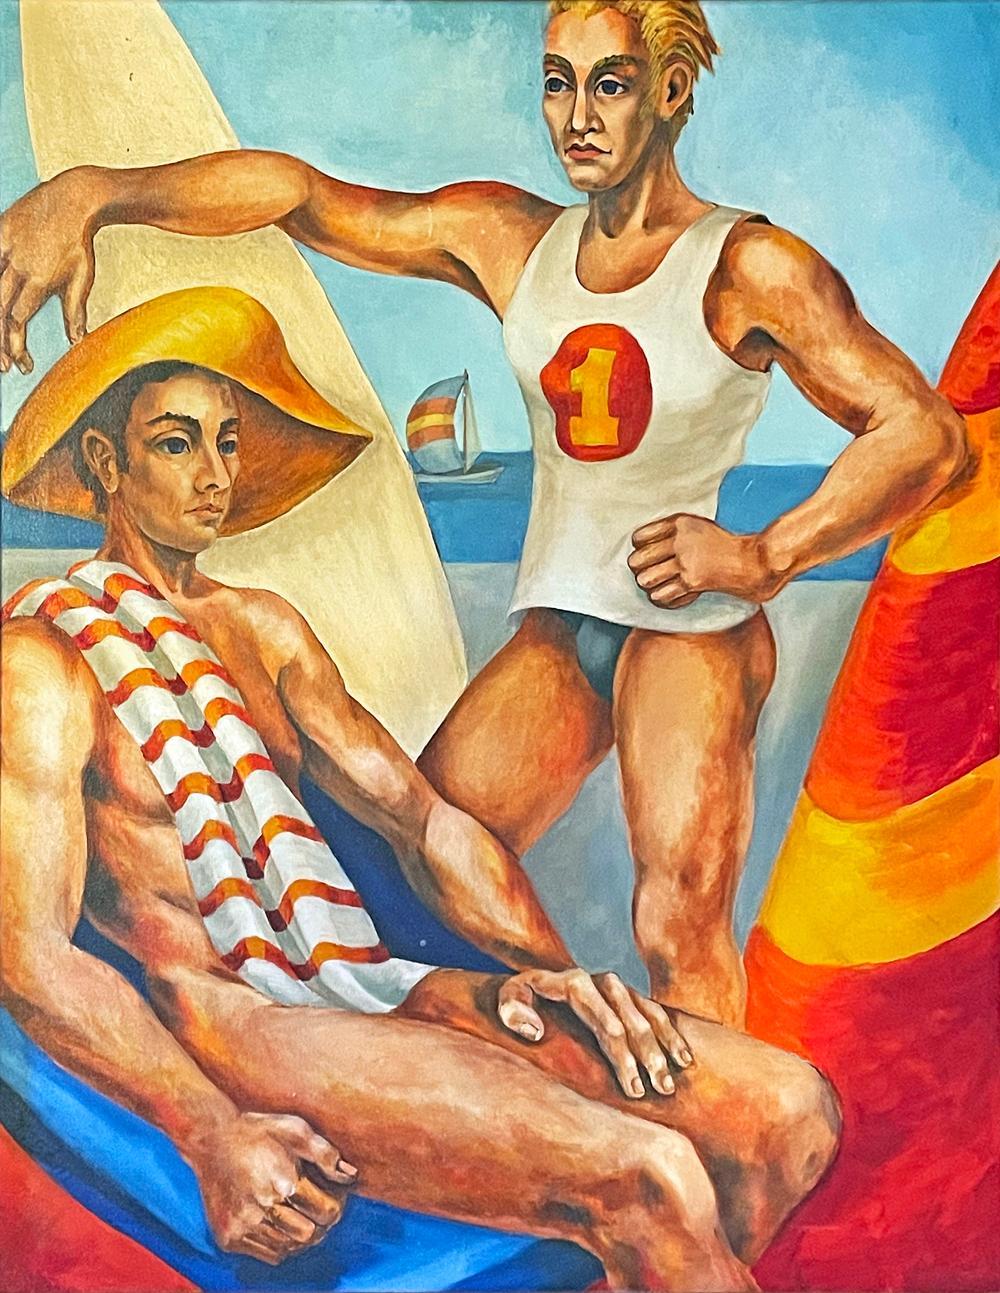 Saturated in bold primary colors -- deep red, brilliant yellow and sky blue -- this scene depicts a standing blond lifeguard with his surfboard to one side and a striped umbrella to the other, accompanied by a seated nude male figure topped with a